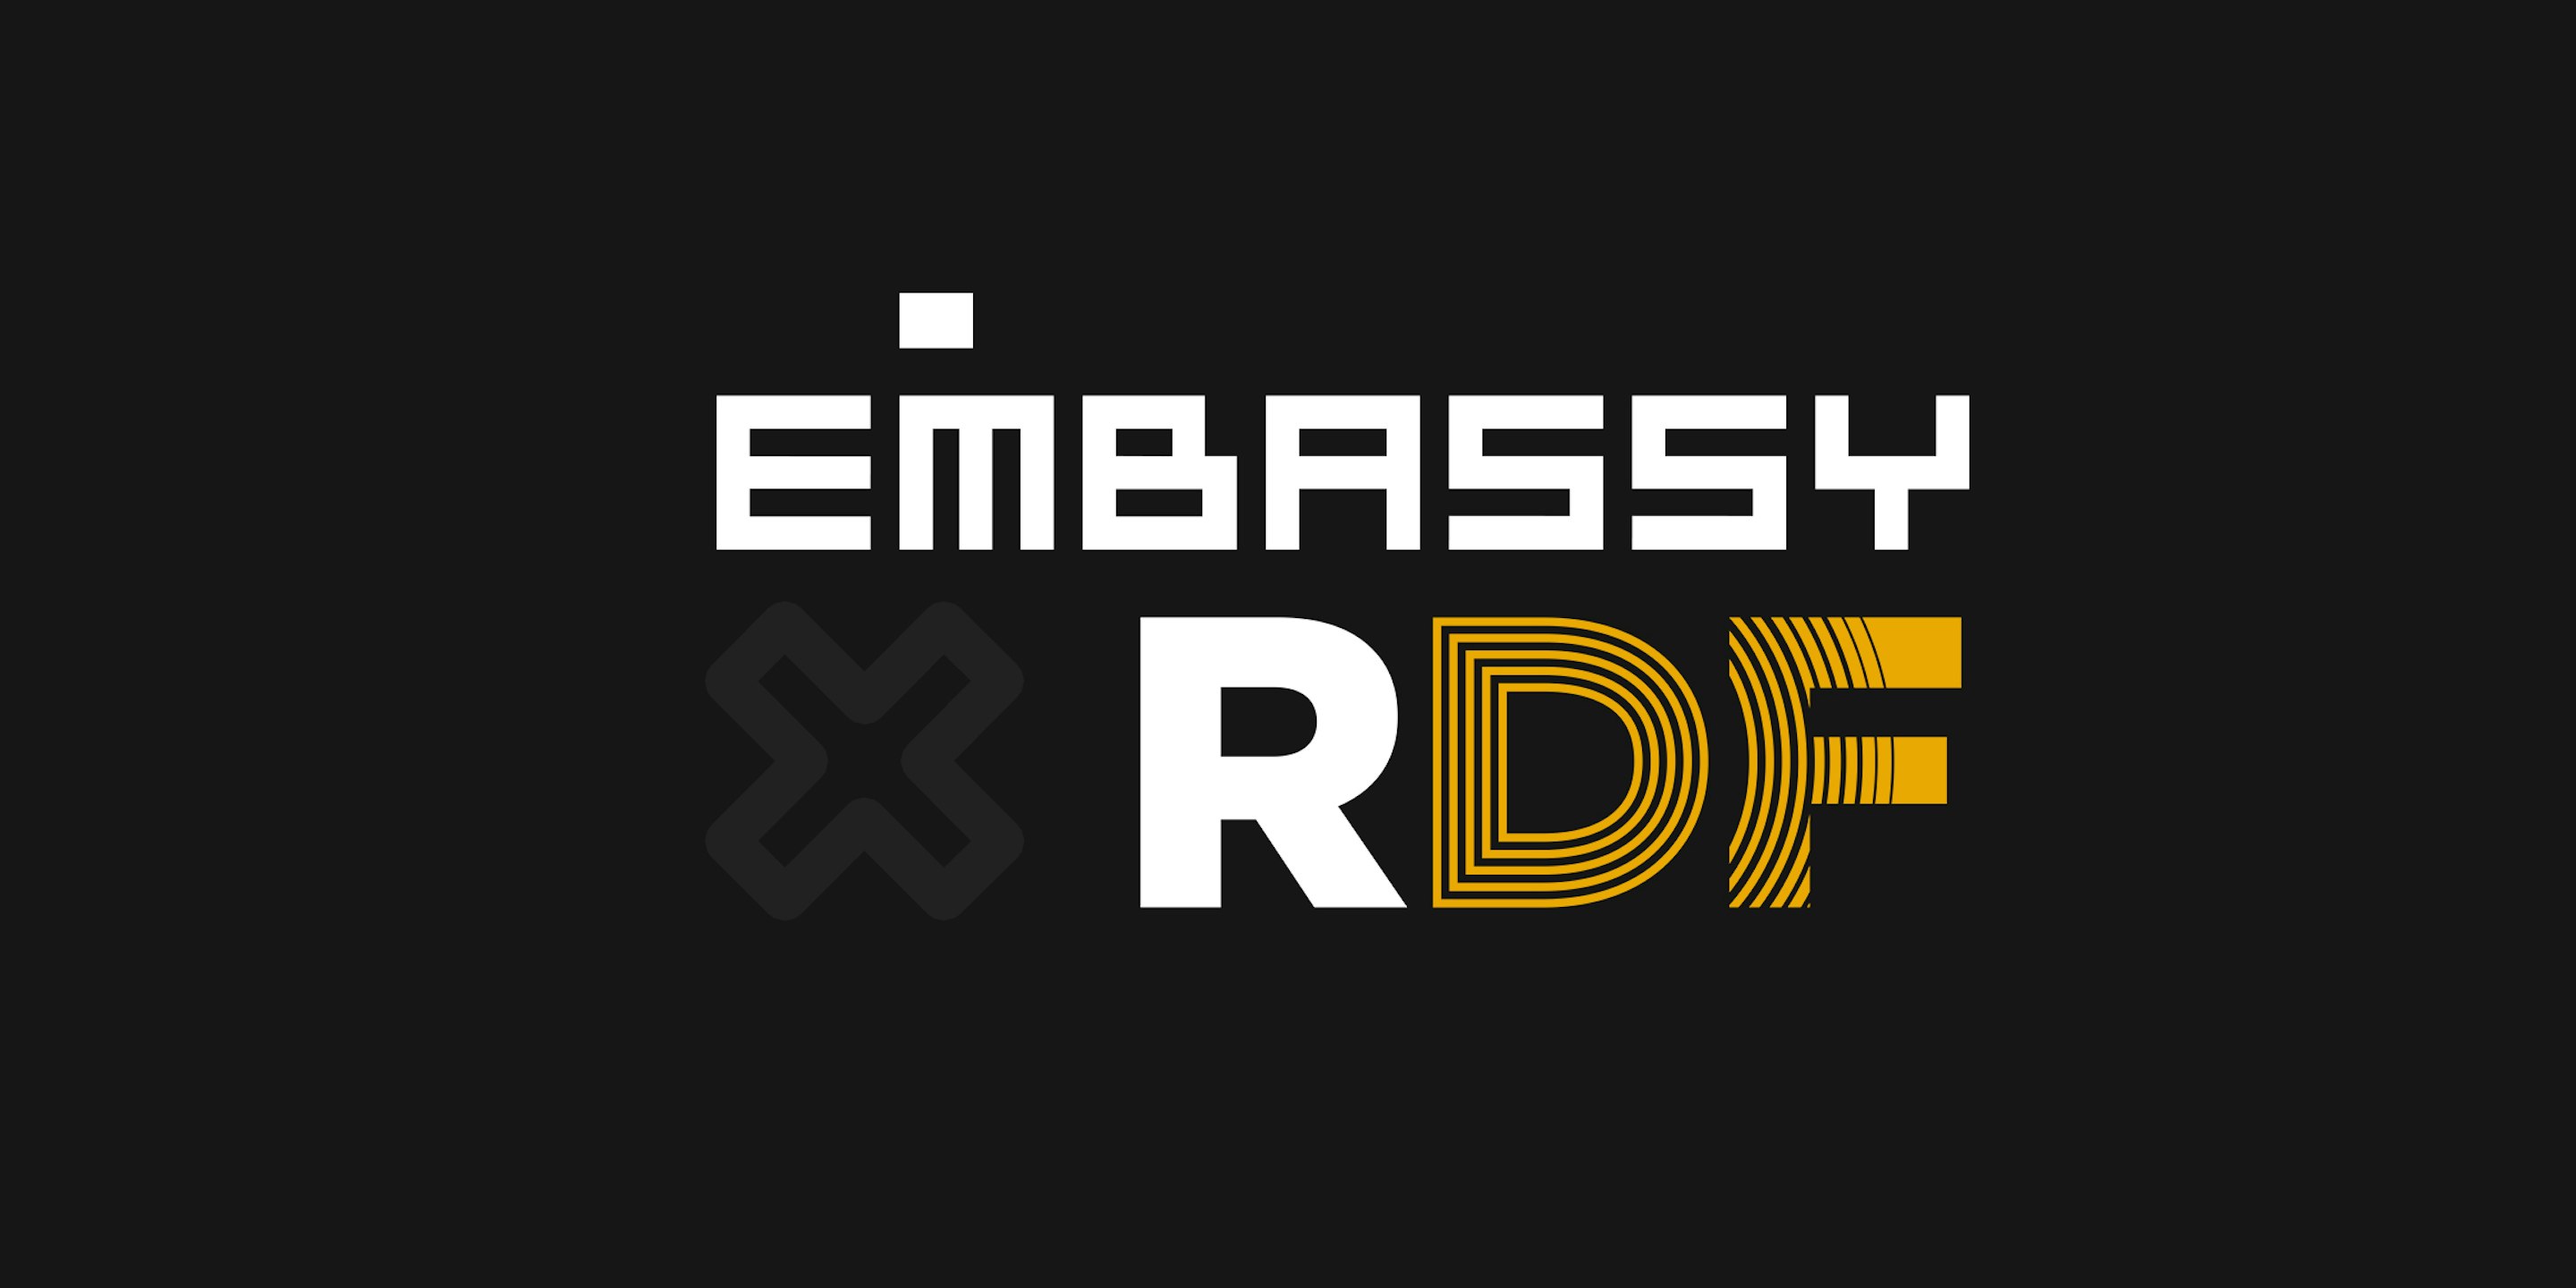 Reality Distortion Field (RDF) and The Embassy strike content partnership